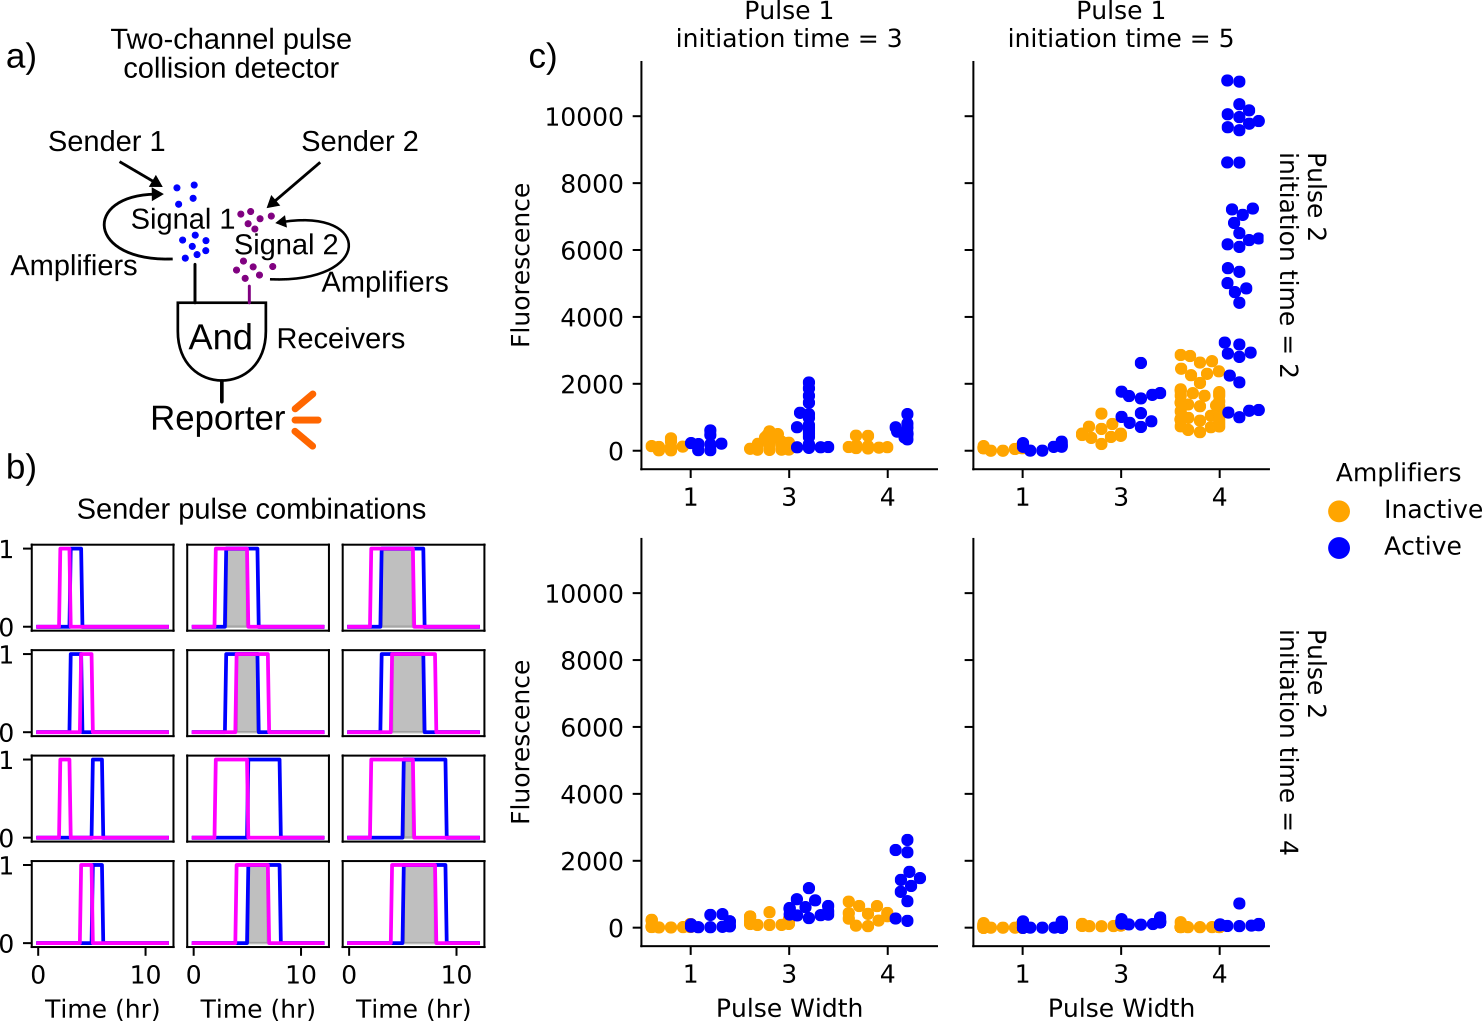 Outline and results of the coincidence detector consortium. (a) depicts a schematic representing the cell-cell signaling relationships represented in these simulations. The two sender populations initiate signaling through the release of diffusible signaling chemicals. Amplifiers, when active, are triggered by the sender populations to contribute to the local concentrations of these chemicals in a pulsatile fashion. The receiver population produces a fluorescent output in the presence of both signaling molecules. Simulations vary the timing and duration of synthase expression within the sender populations as shown in (b). Simulations span 12 hours. Gray-shaded regions indicate overlapping synthase expression within the sender populations. Plots in (c) show the maximum pixel values within the receiver population obtained over three simulations of each sender-emission pattern. Each of these three iterations employs a different random spatial patterning of the founding population, which is composed of a single founder of each of the sender and receiver strains and 100 amplifier/bystander cells. These random initial conditions are repeated for consortia with active and inactive amplifier cells such that active/inactive cases can be compared directly. In all assayed conditions, utilizing parameters governing gene networks of sender, amplifiers, and receivers as well as cell growth in B.1 and use the same arena and consortia geometry as in 4.5. The simulated receiver fluorescence indicates the degree to which the population receives input from both sender cells. All conditions show a greater average response in the receiver population when amplifiers are active. However, only the simulations in which one pulse initiates at 2 hours and the other at 5 hours results in significant expression. This is likely a result of the time-varying nutrient availability and suggests the relationship between event timing and response is non-trivial and not intuitive. Further exploring the spatiotemporal dynamics of nutrient availability in simulation requires more experimental data capturing these effects in order to be predictive.